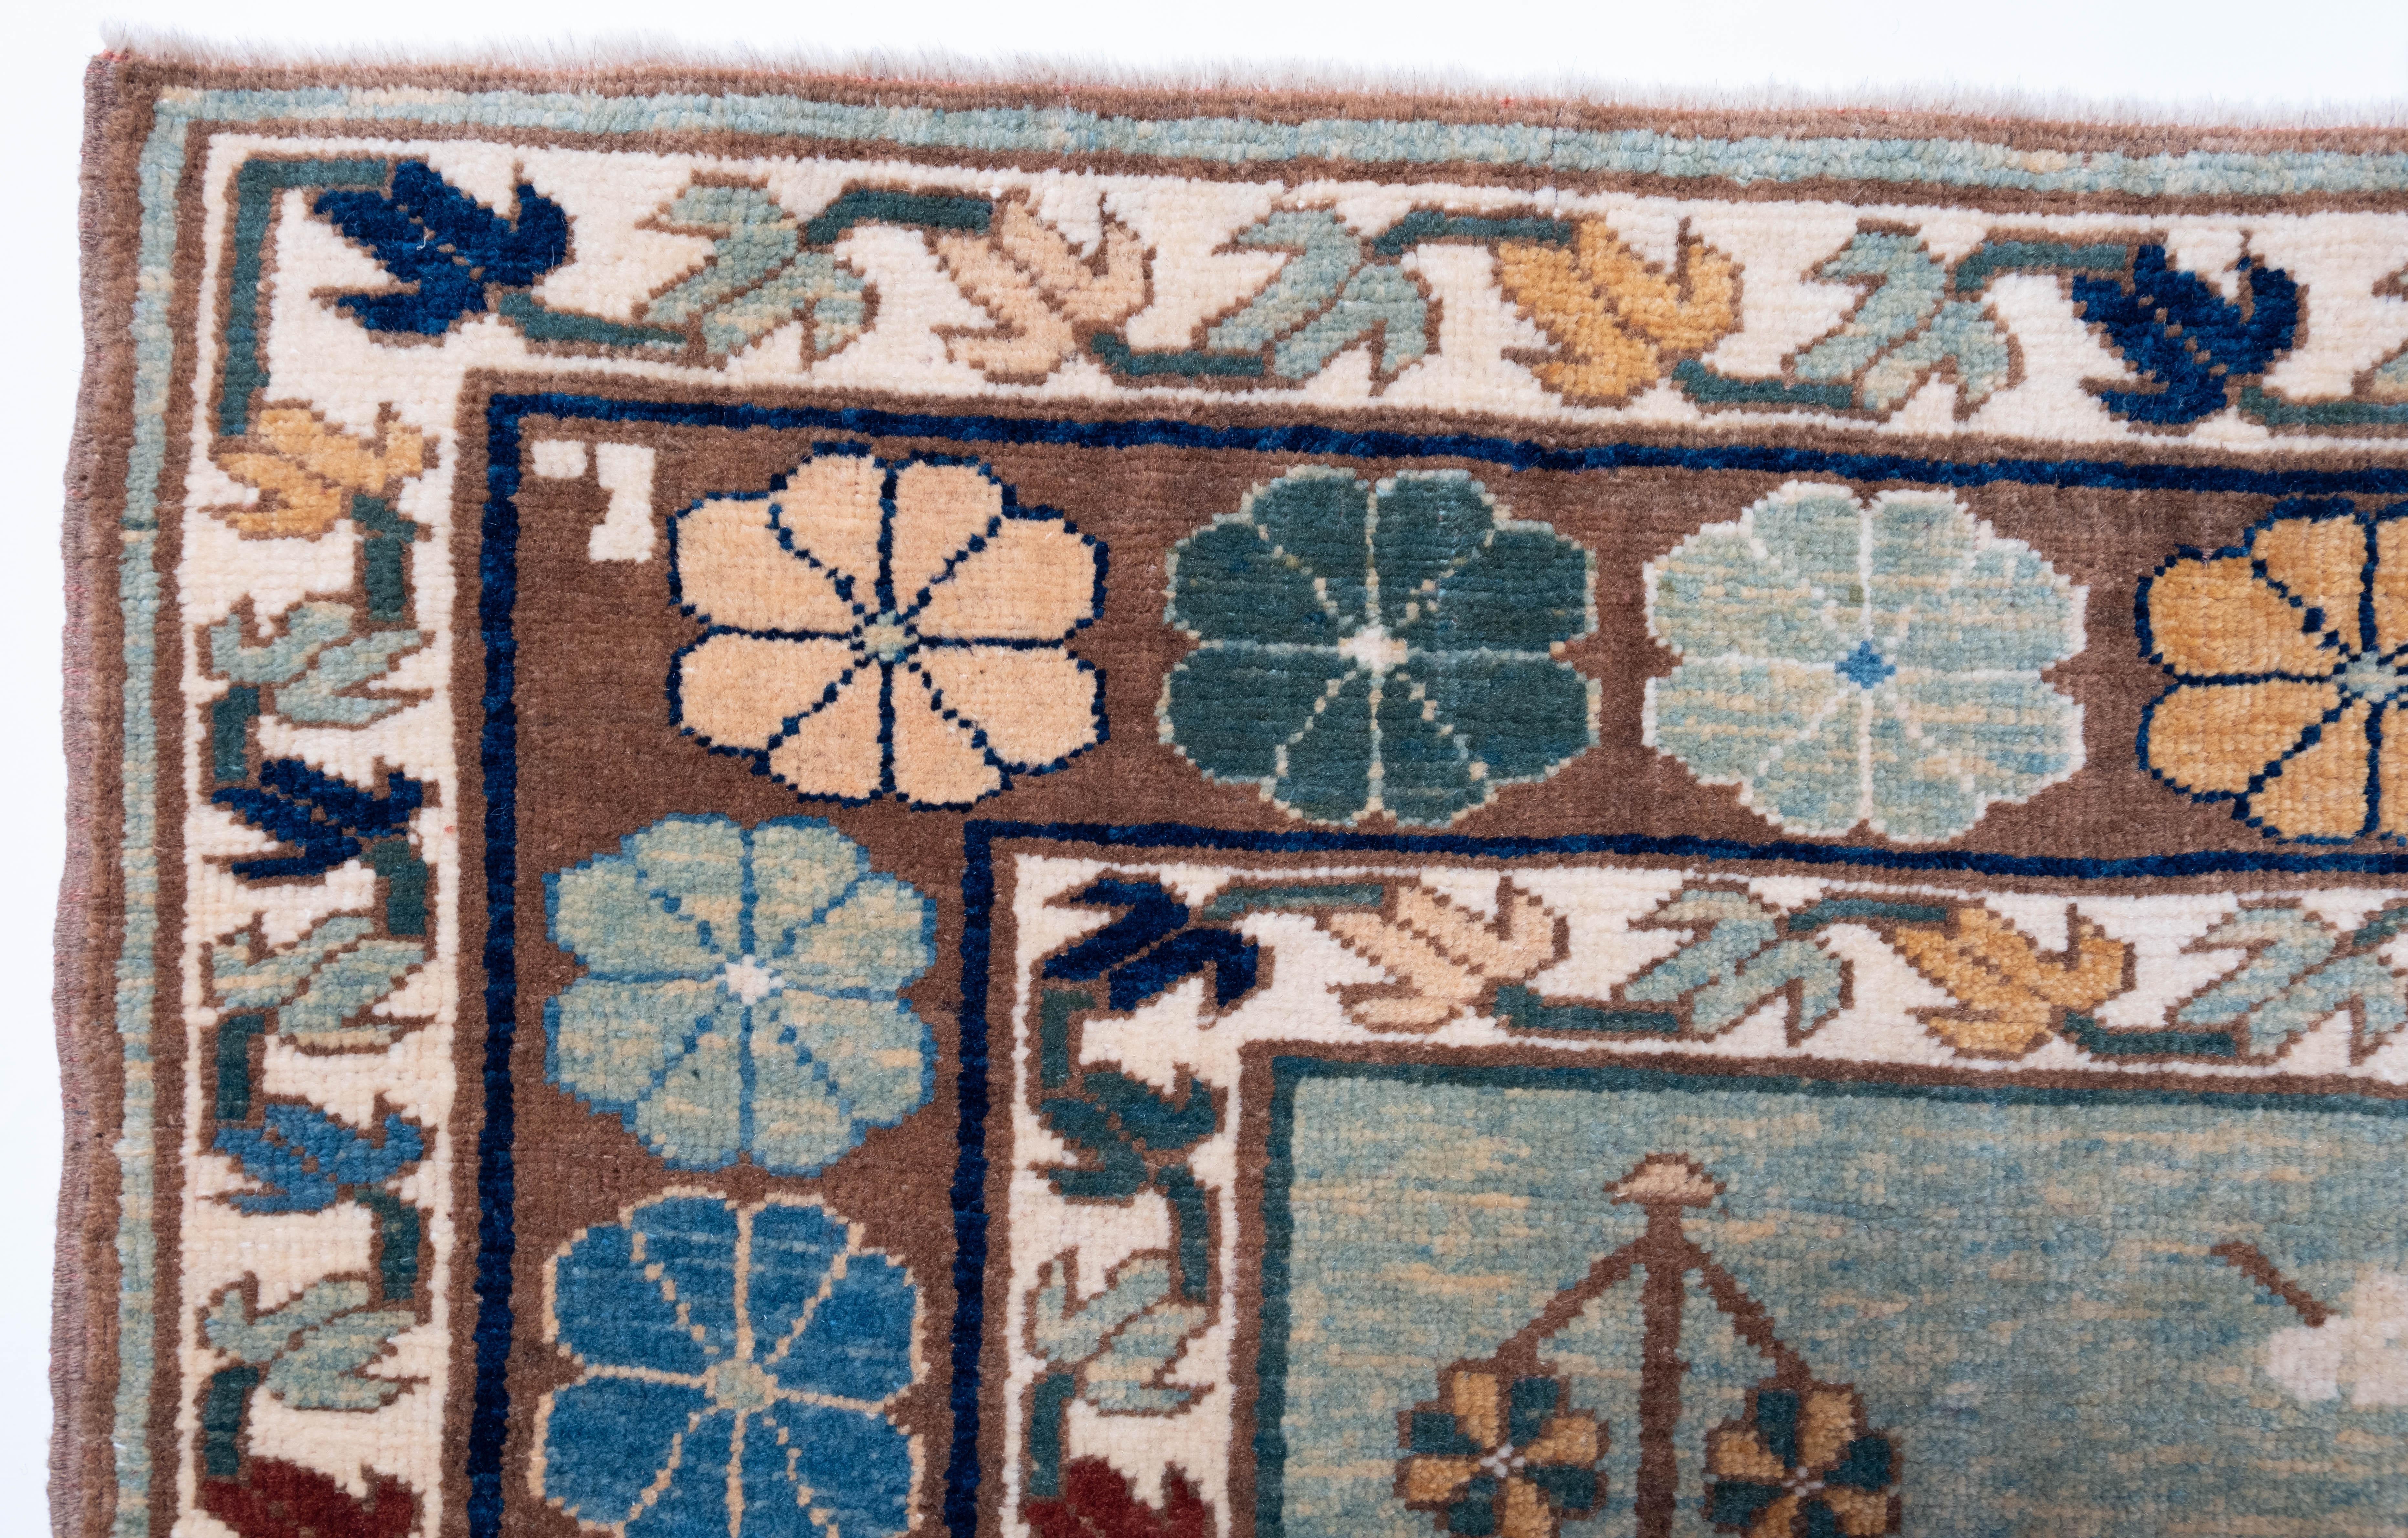 The source of the rug comes from the book Tapis du Caucase - Rugs of the Caucasus, Ian Bennett & Aziz Bassoul, The Nicholas Sursock Museum, Beirut, Lebanon 2003, nr.45 and Oriental Rugs Volume 1 Caucasian, Ian Bennett, Oriental Textile Press,